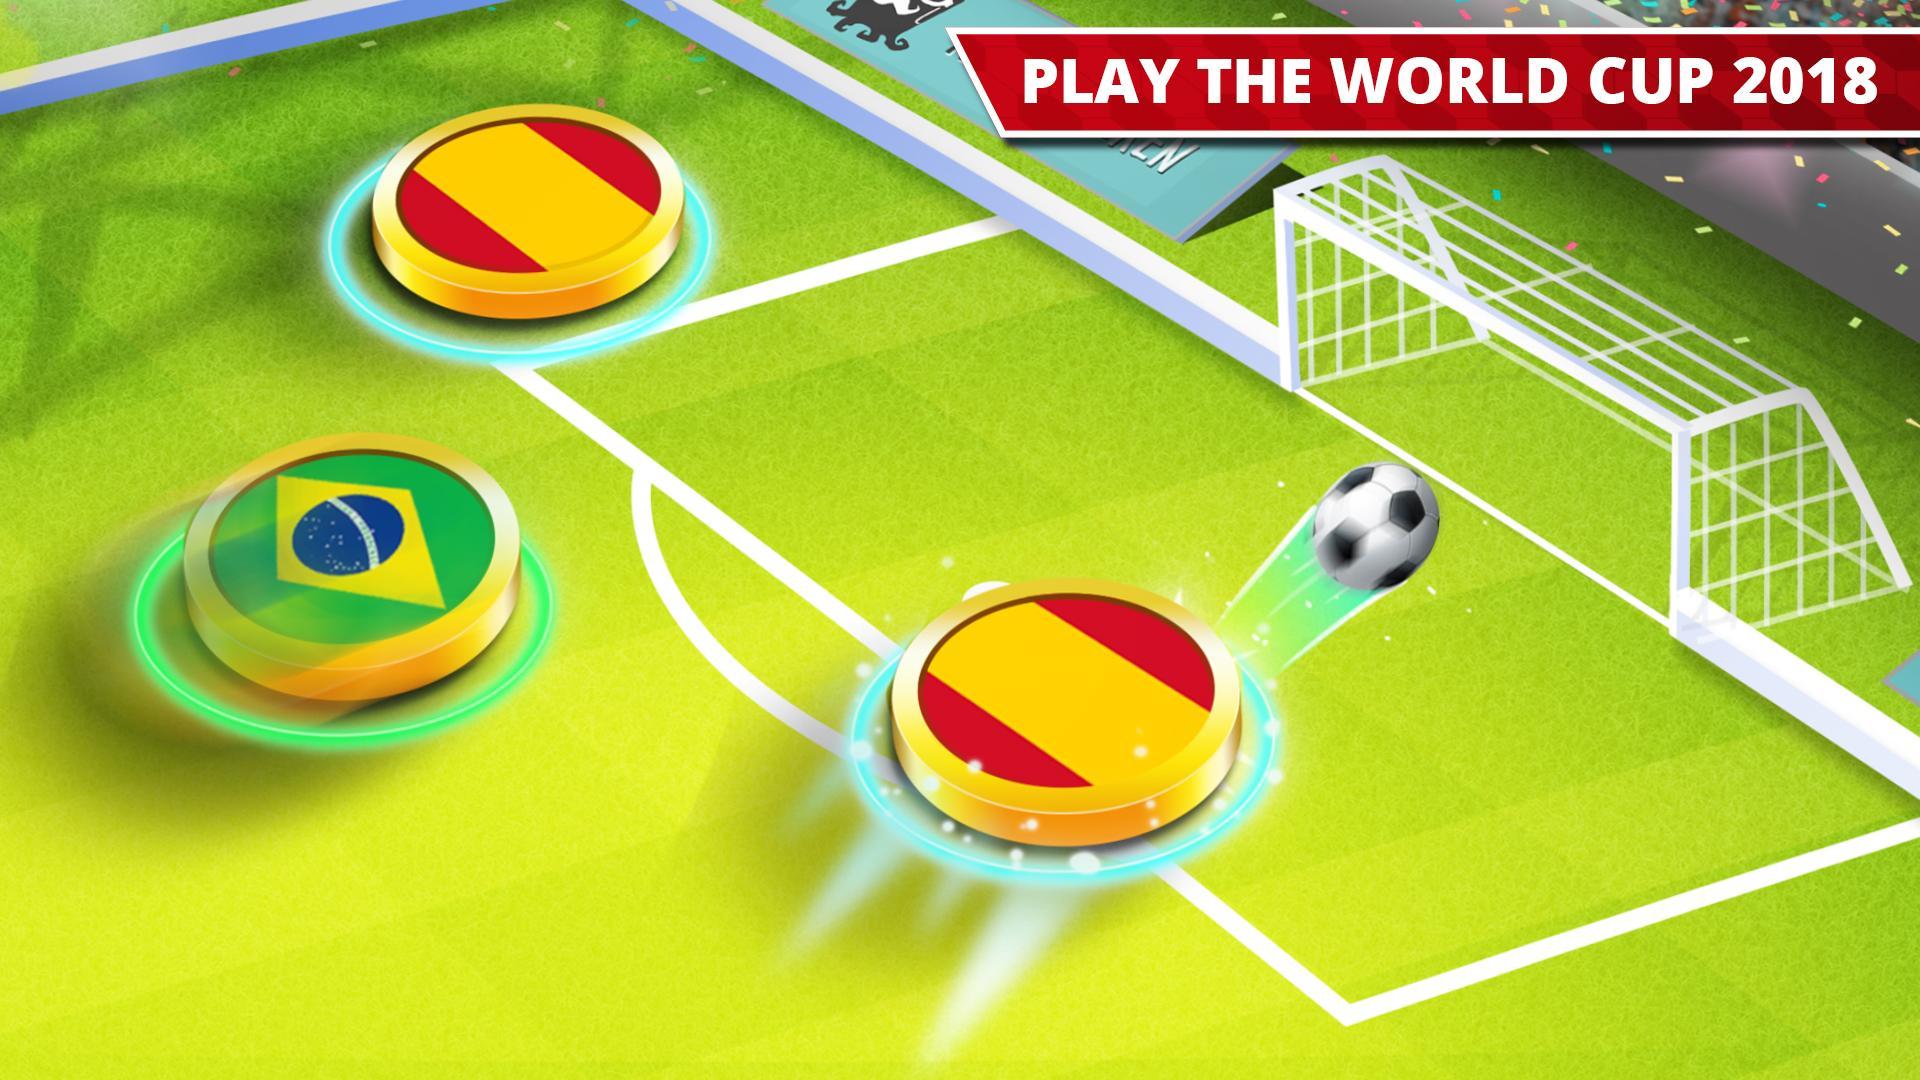 World Cup Soccer Games Caps 2018 for Android - APK Download